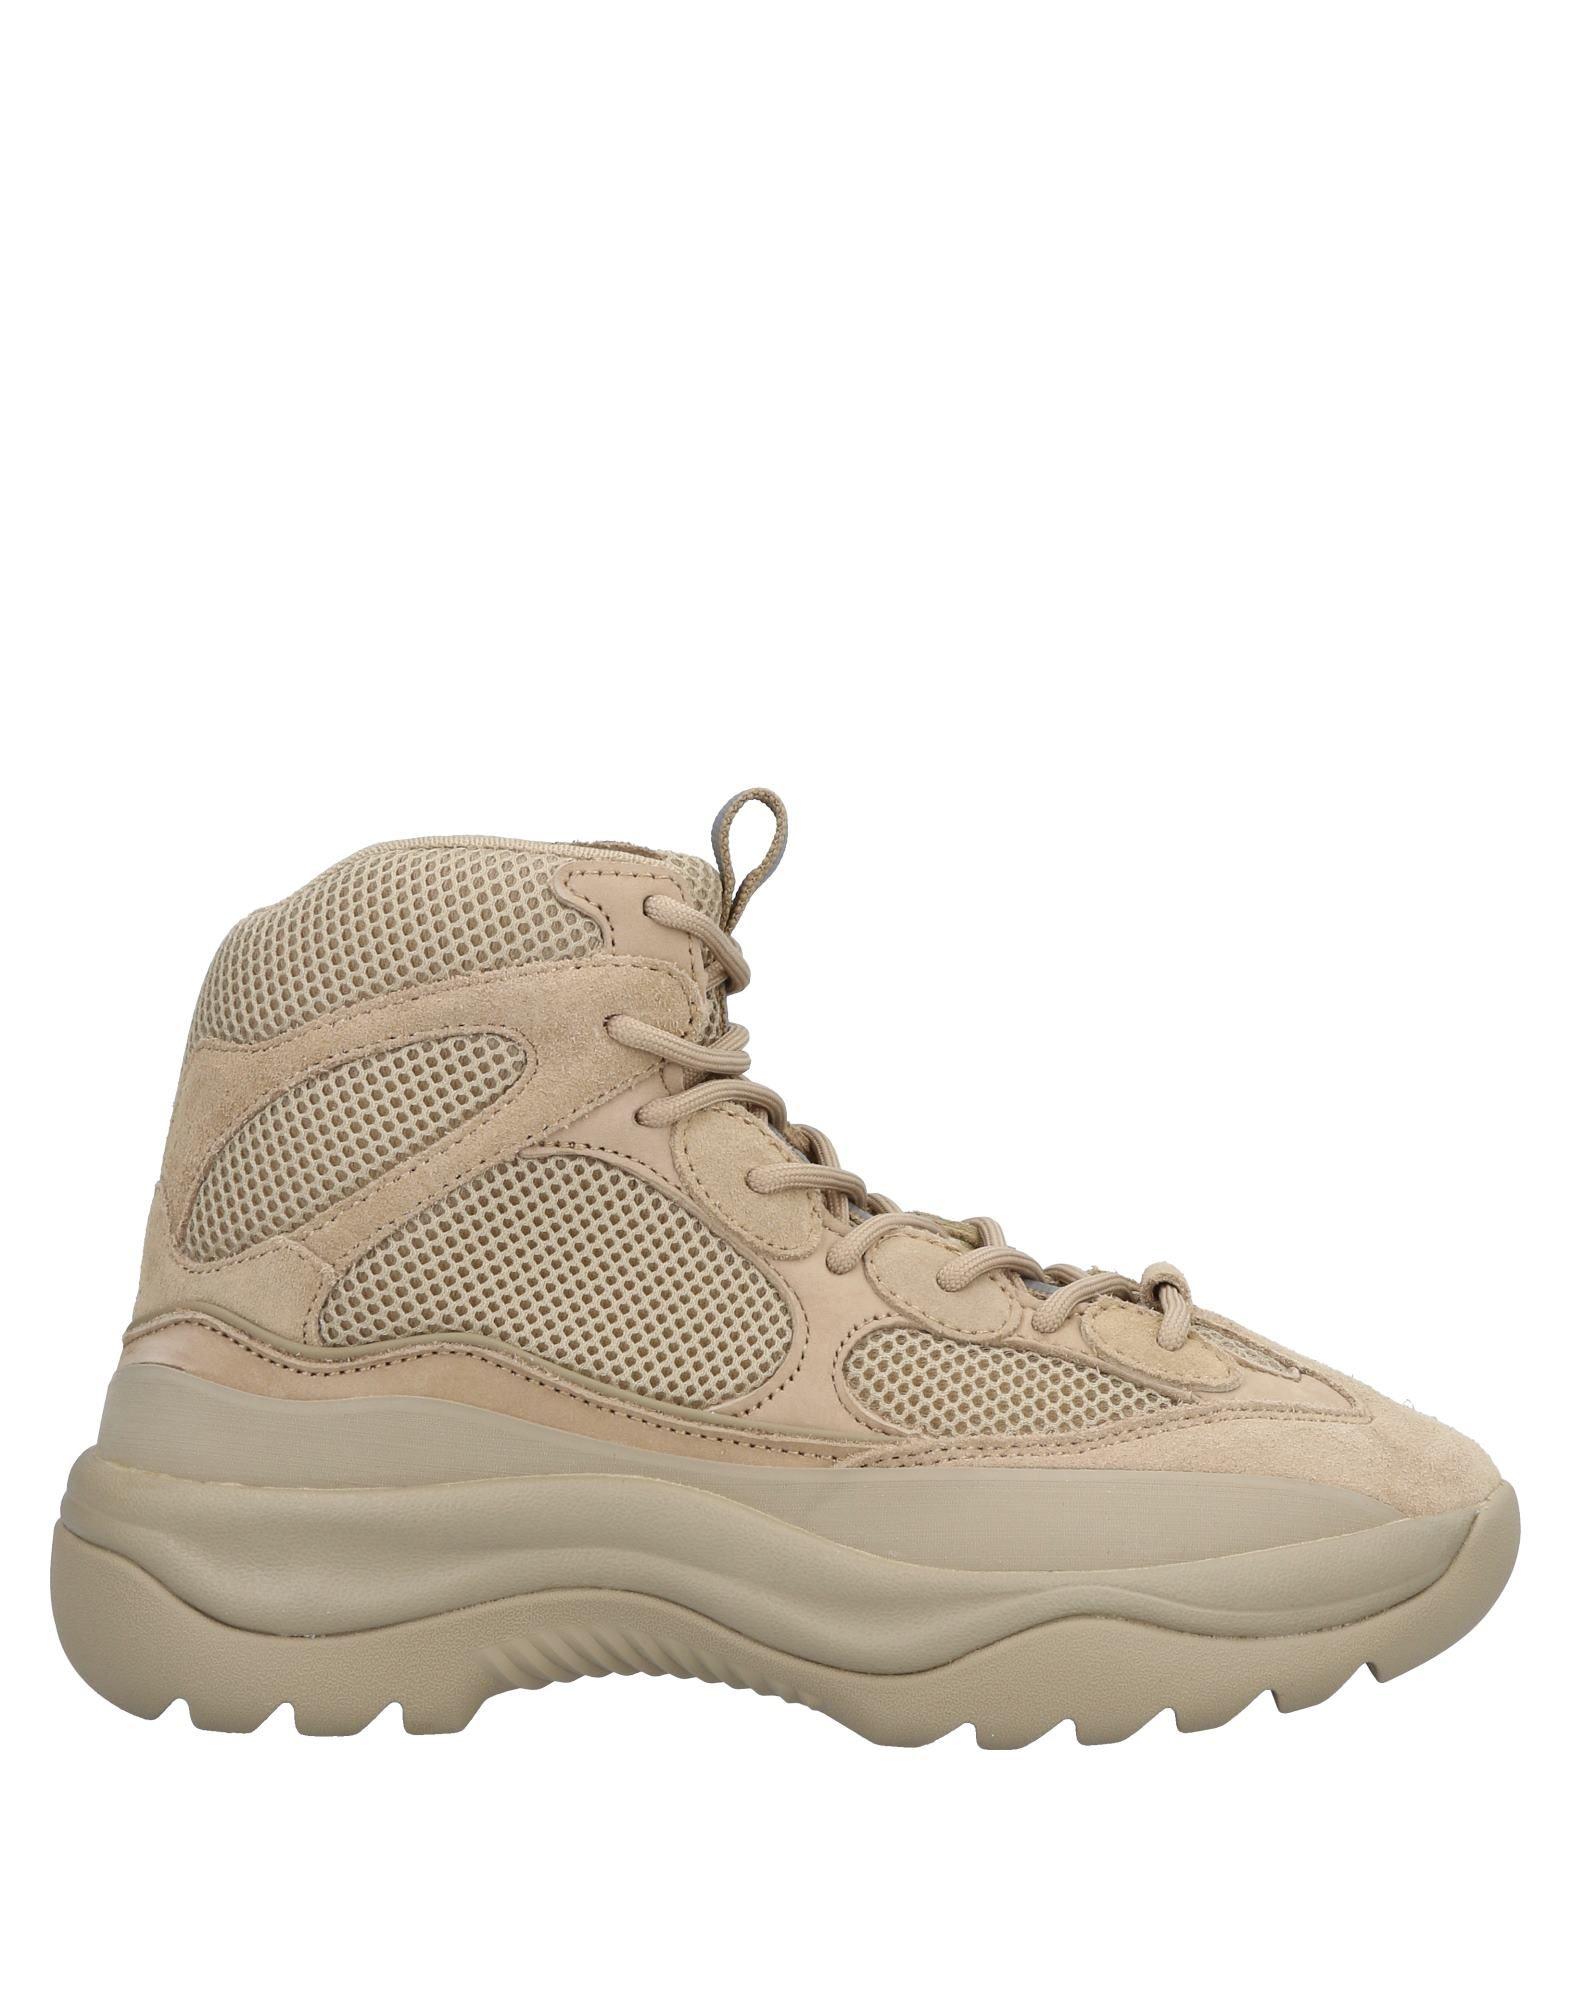 Yeezy High-tops & Sneakers in Natural for Men - Lyst